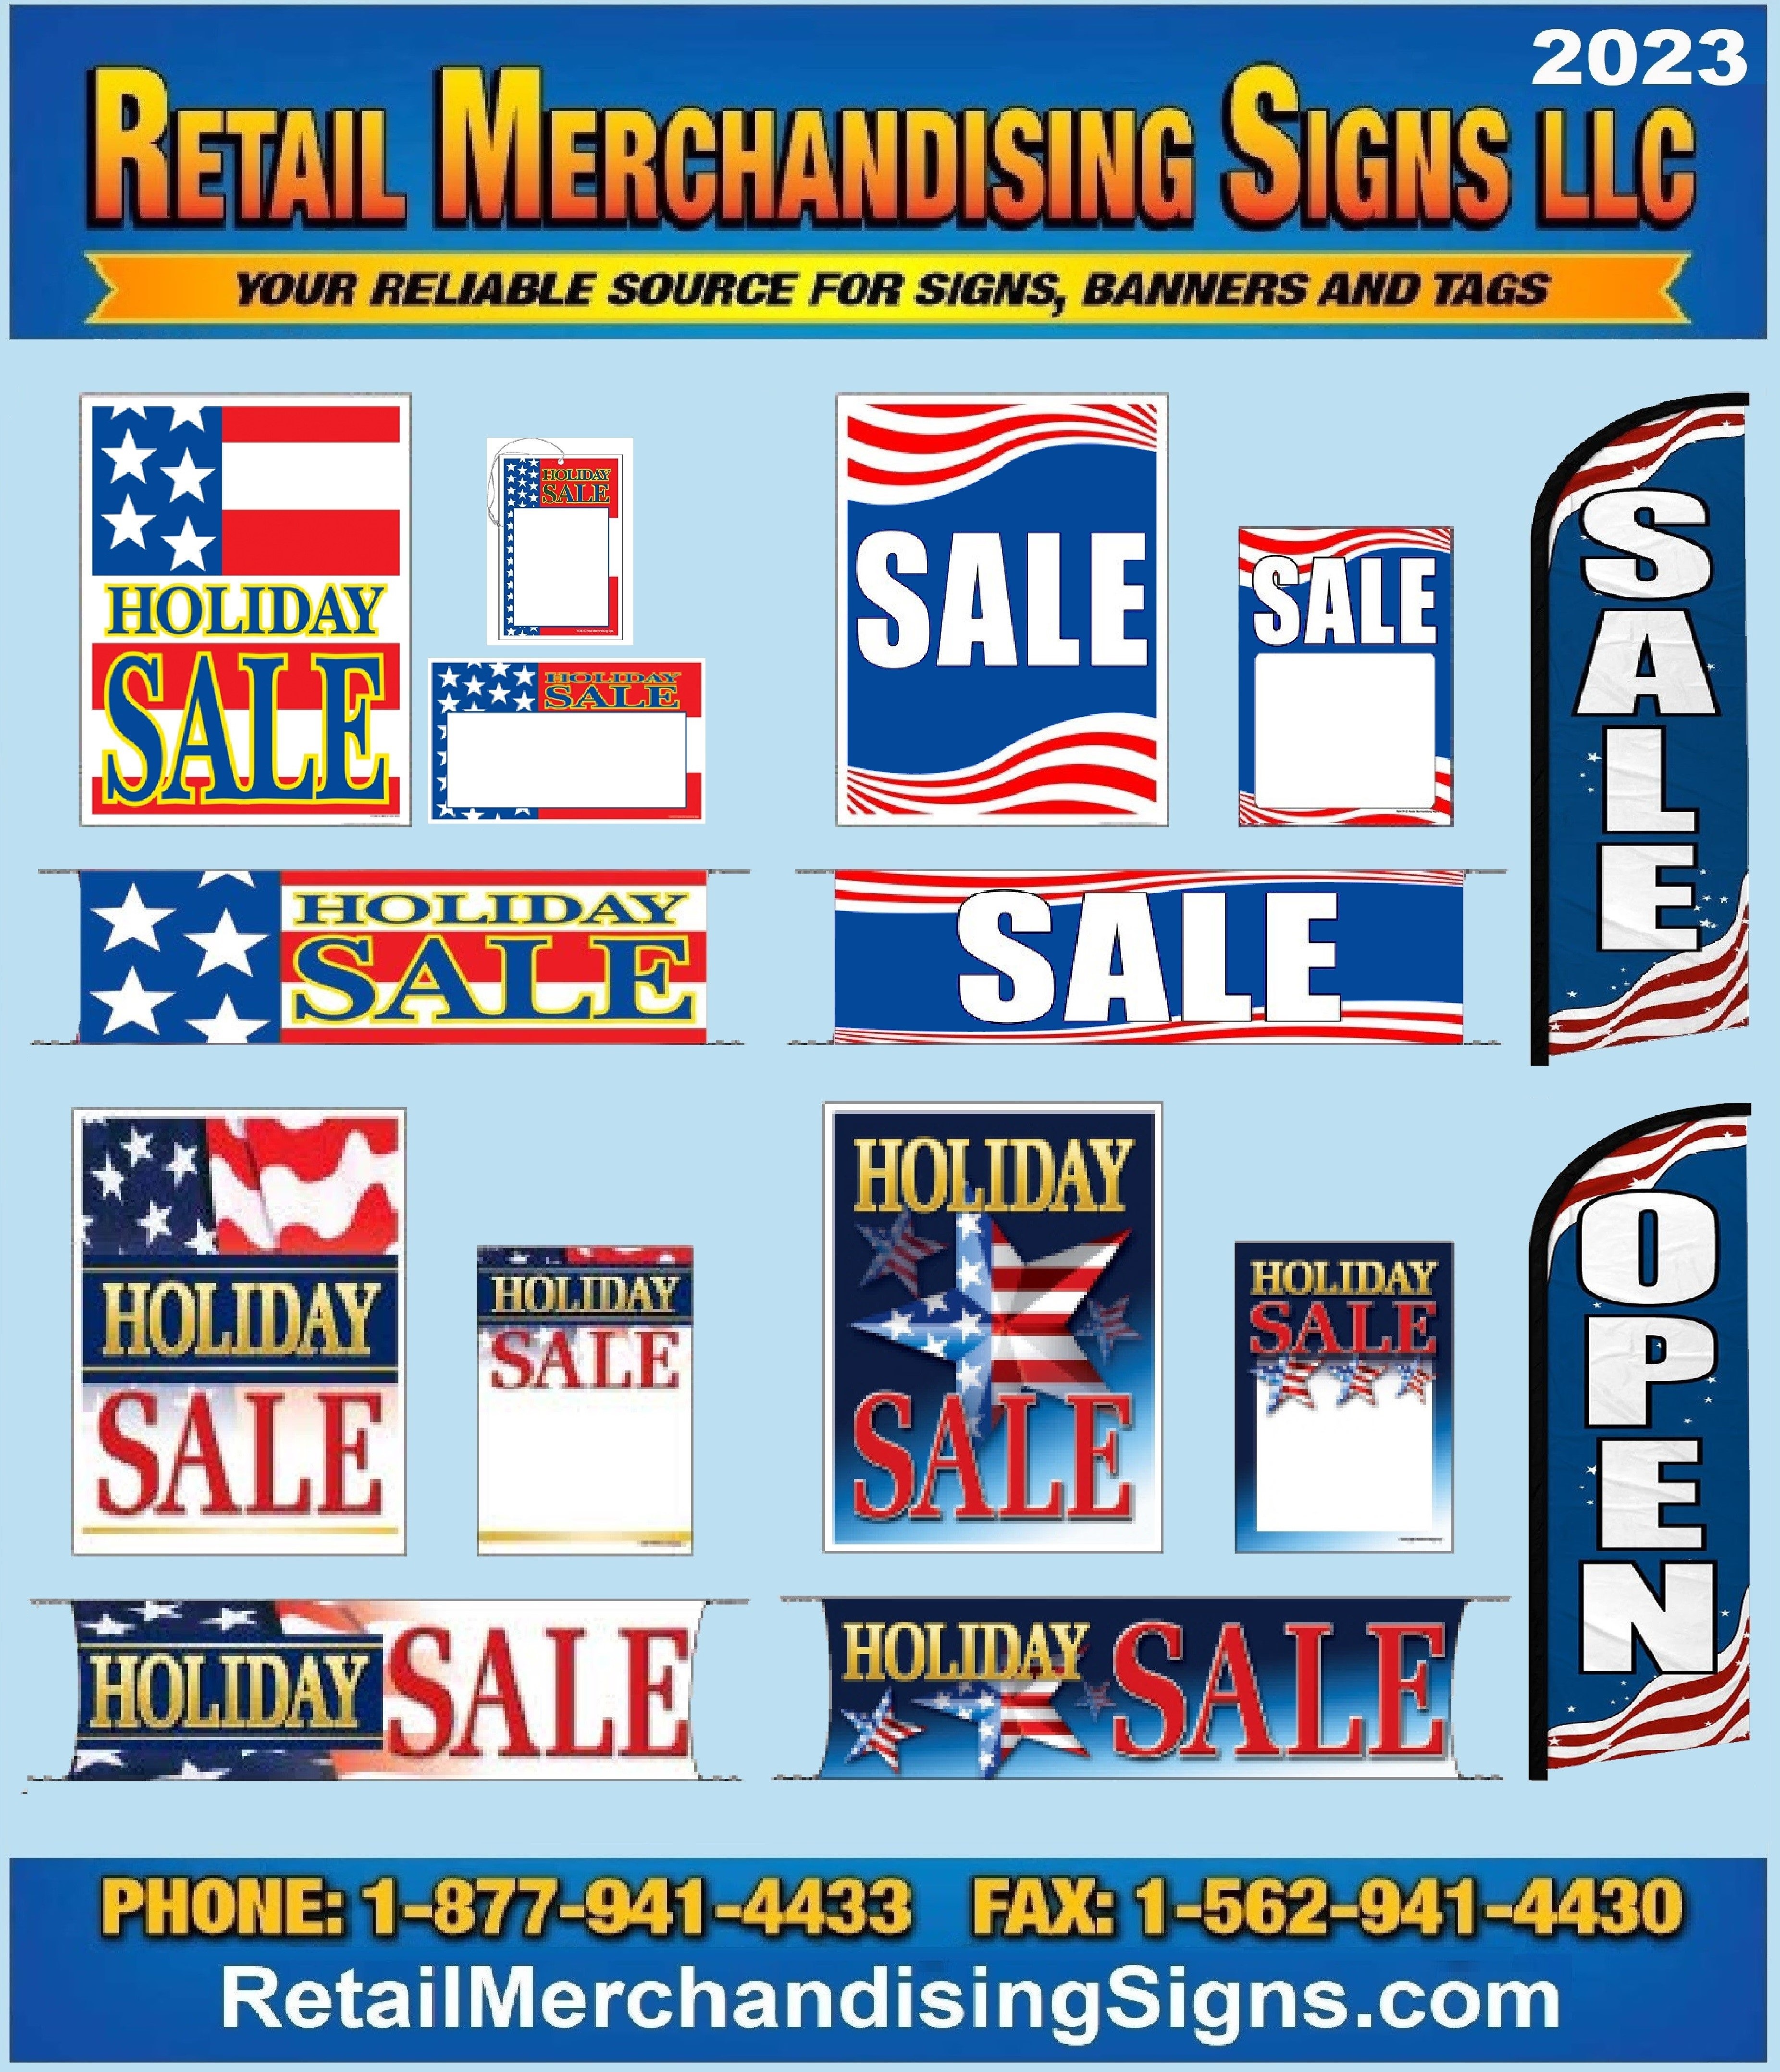 P40BYF | Black | Friday Sale Red Tag | Holiday Seasonal Vinyl Window Sale  Sign Posters | Retail Business Store Signs | (P40-25 x 33)